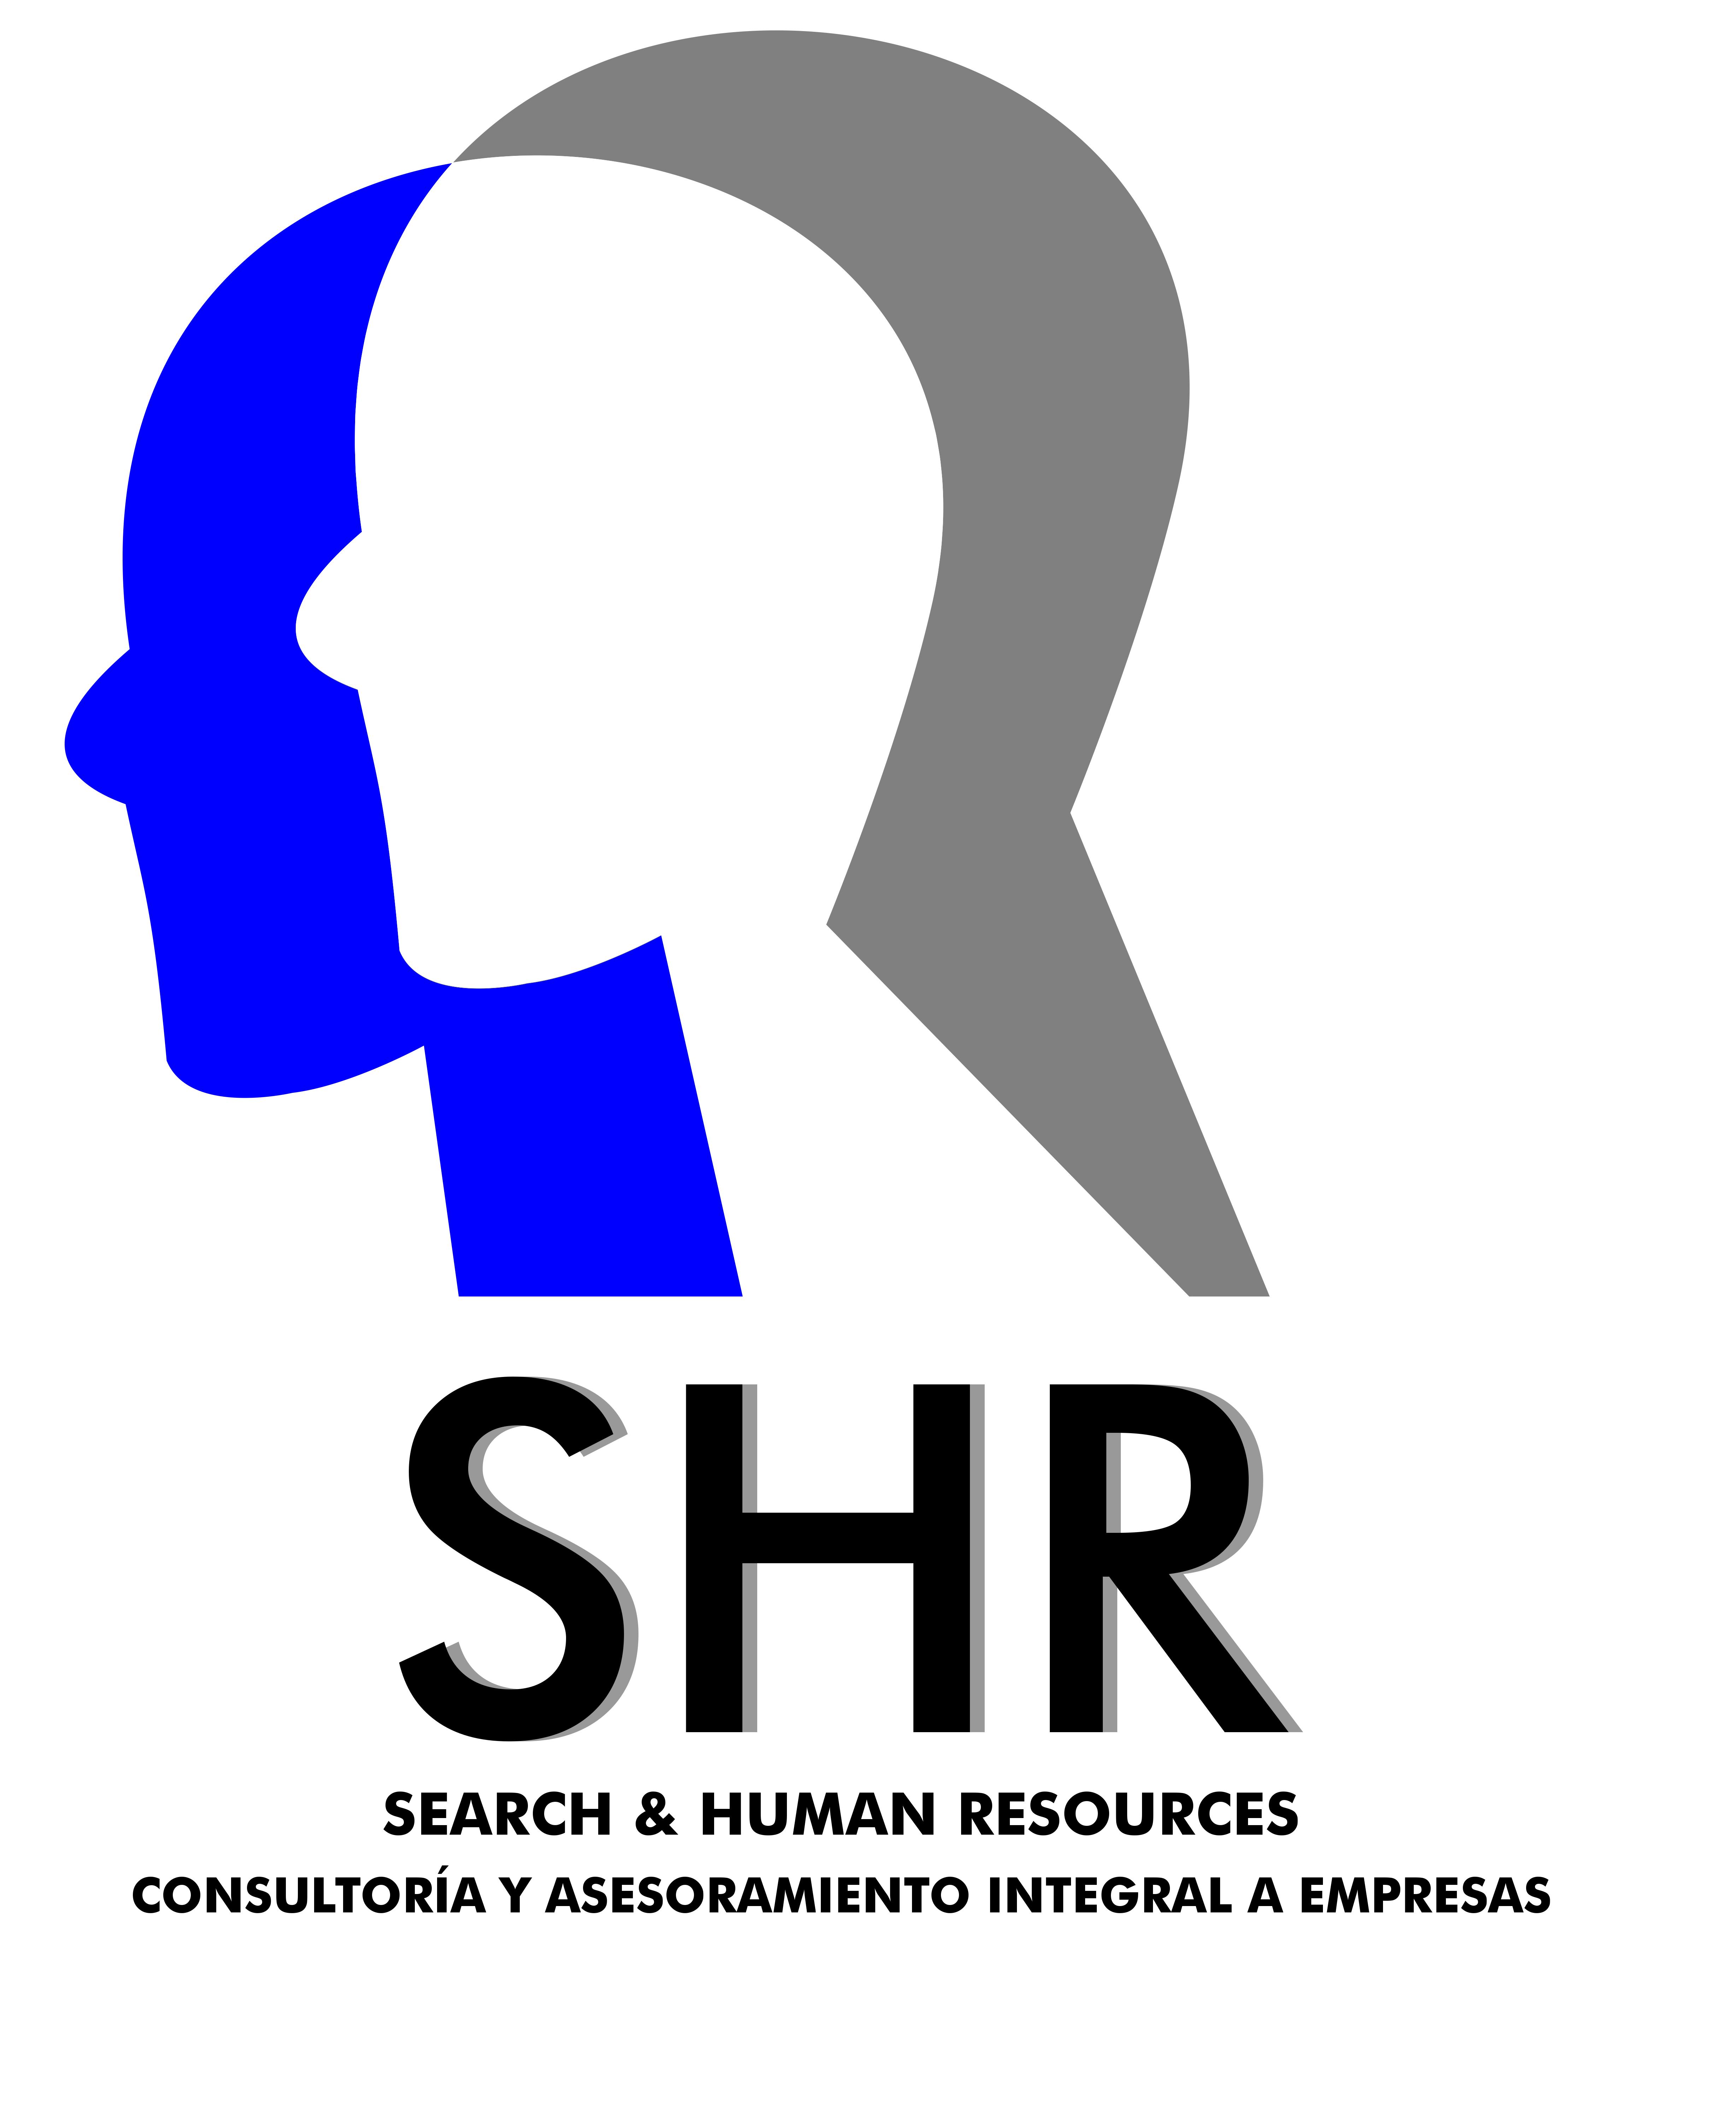 SEARCH & HUMAN RESOURCES